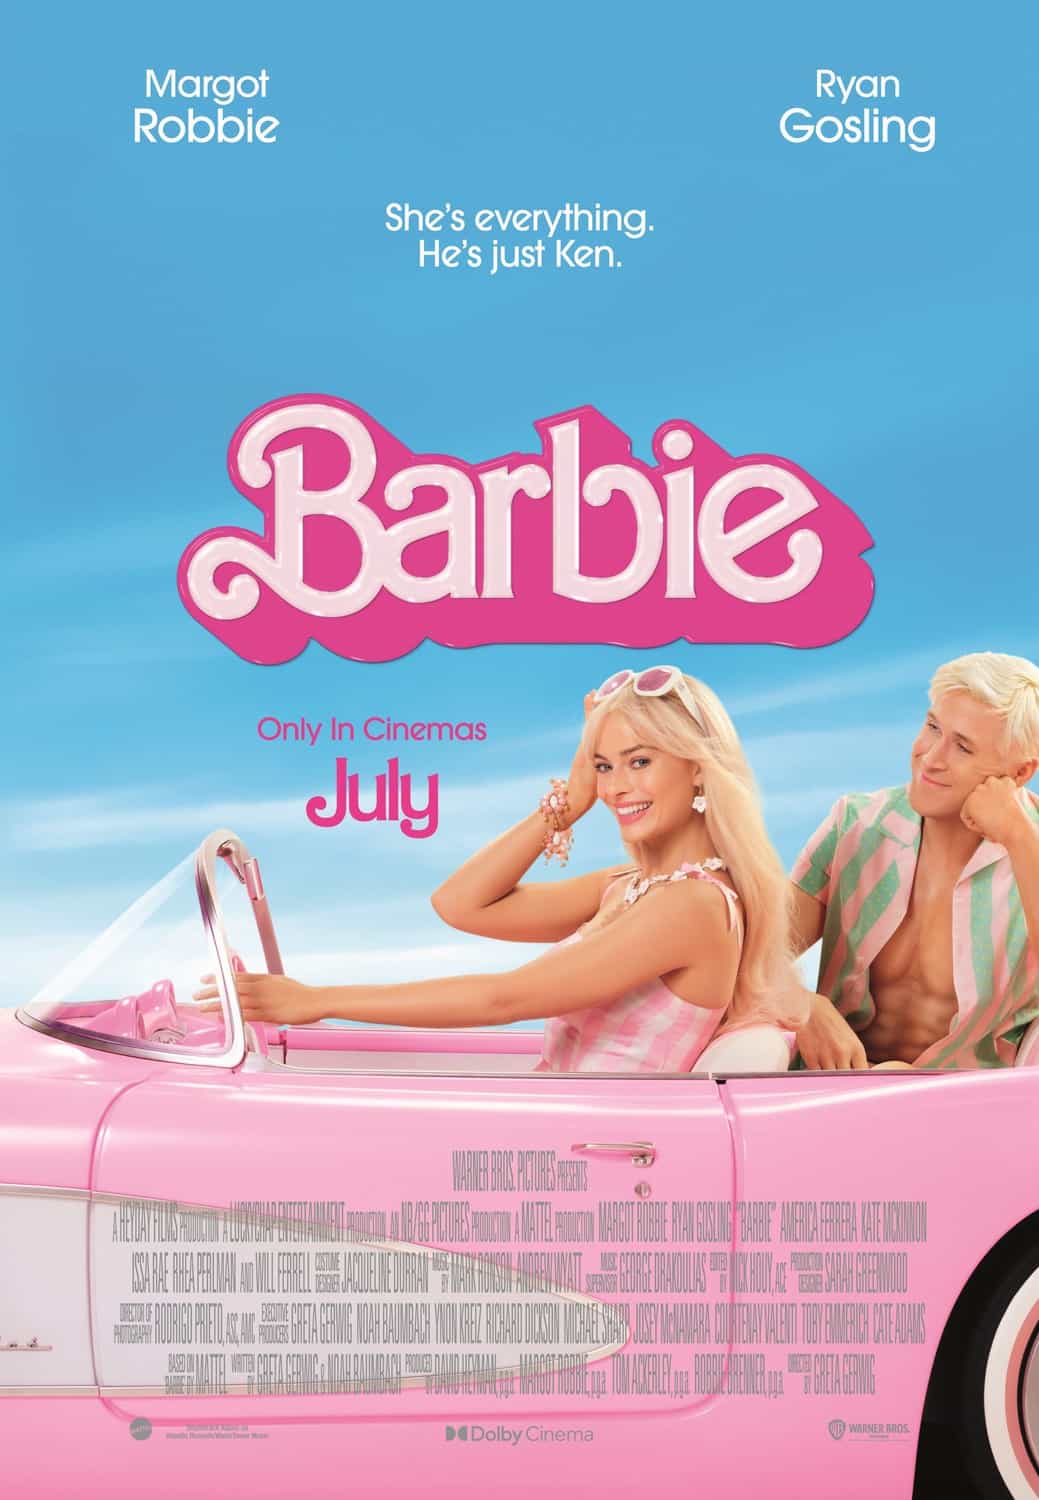 UK Box Office Weekend Report 11th - 13th August 2023: Barbie remains at the top for a fourth weekend while Gran Turismo is the top new movie at 4